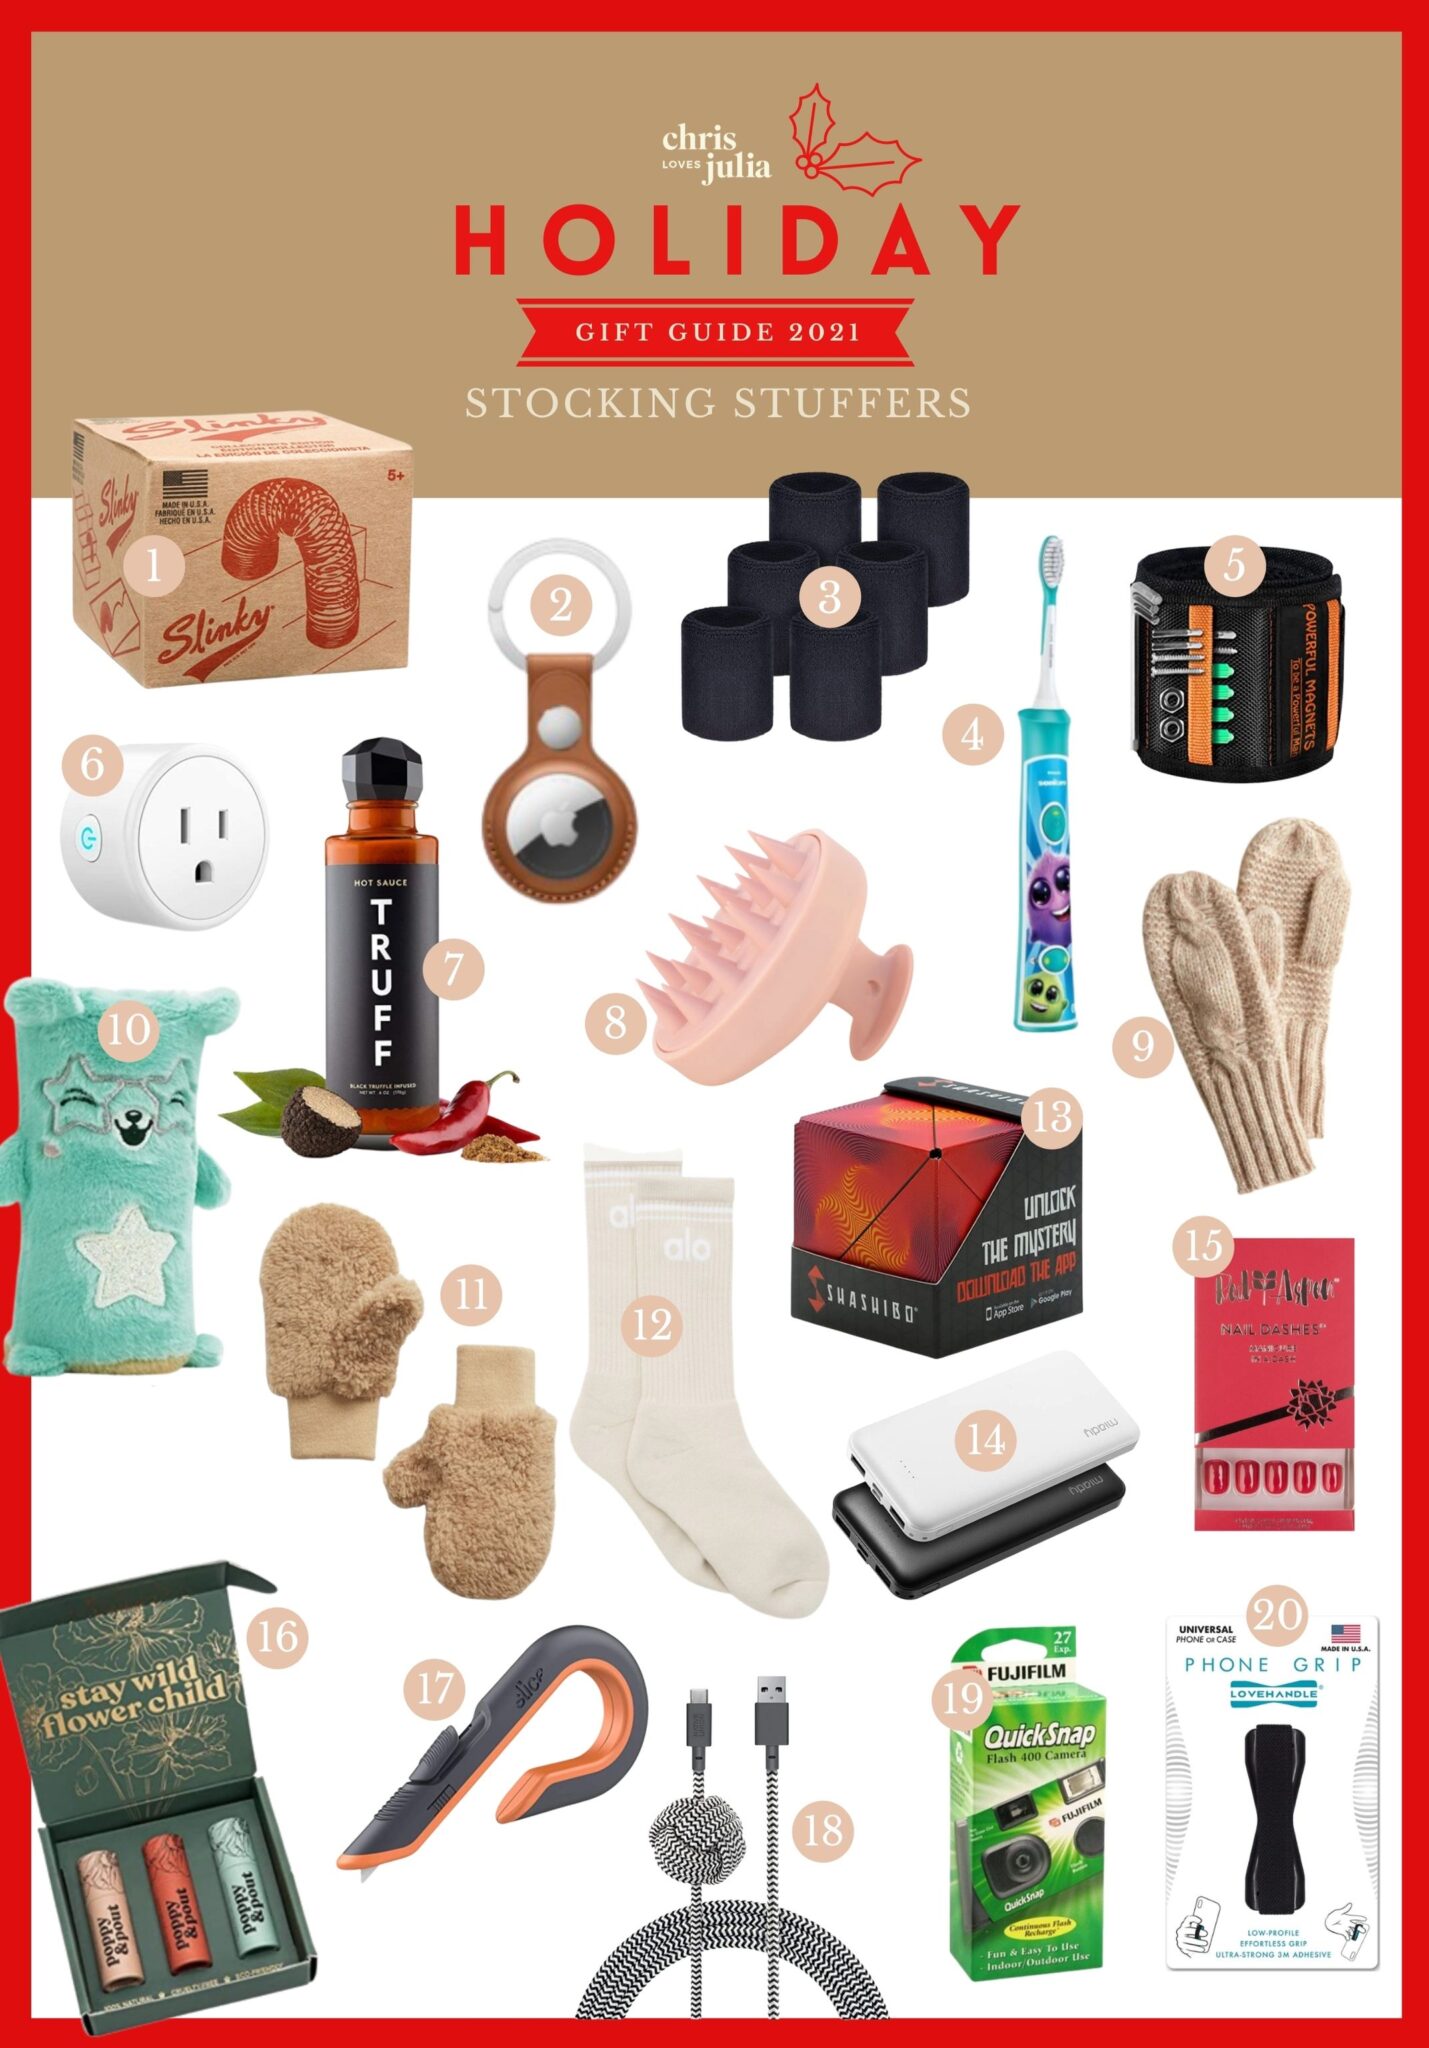 Holiday Gift Guide  Favorite Things Under $35 - Chris Loves Julia